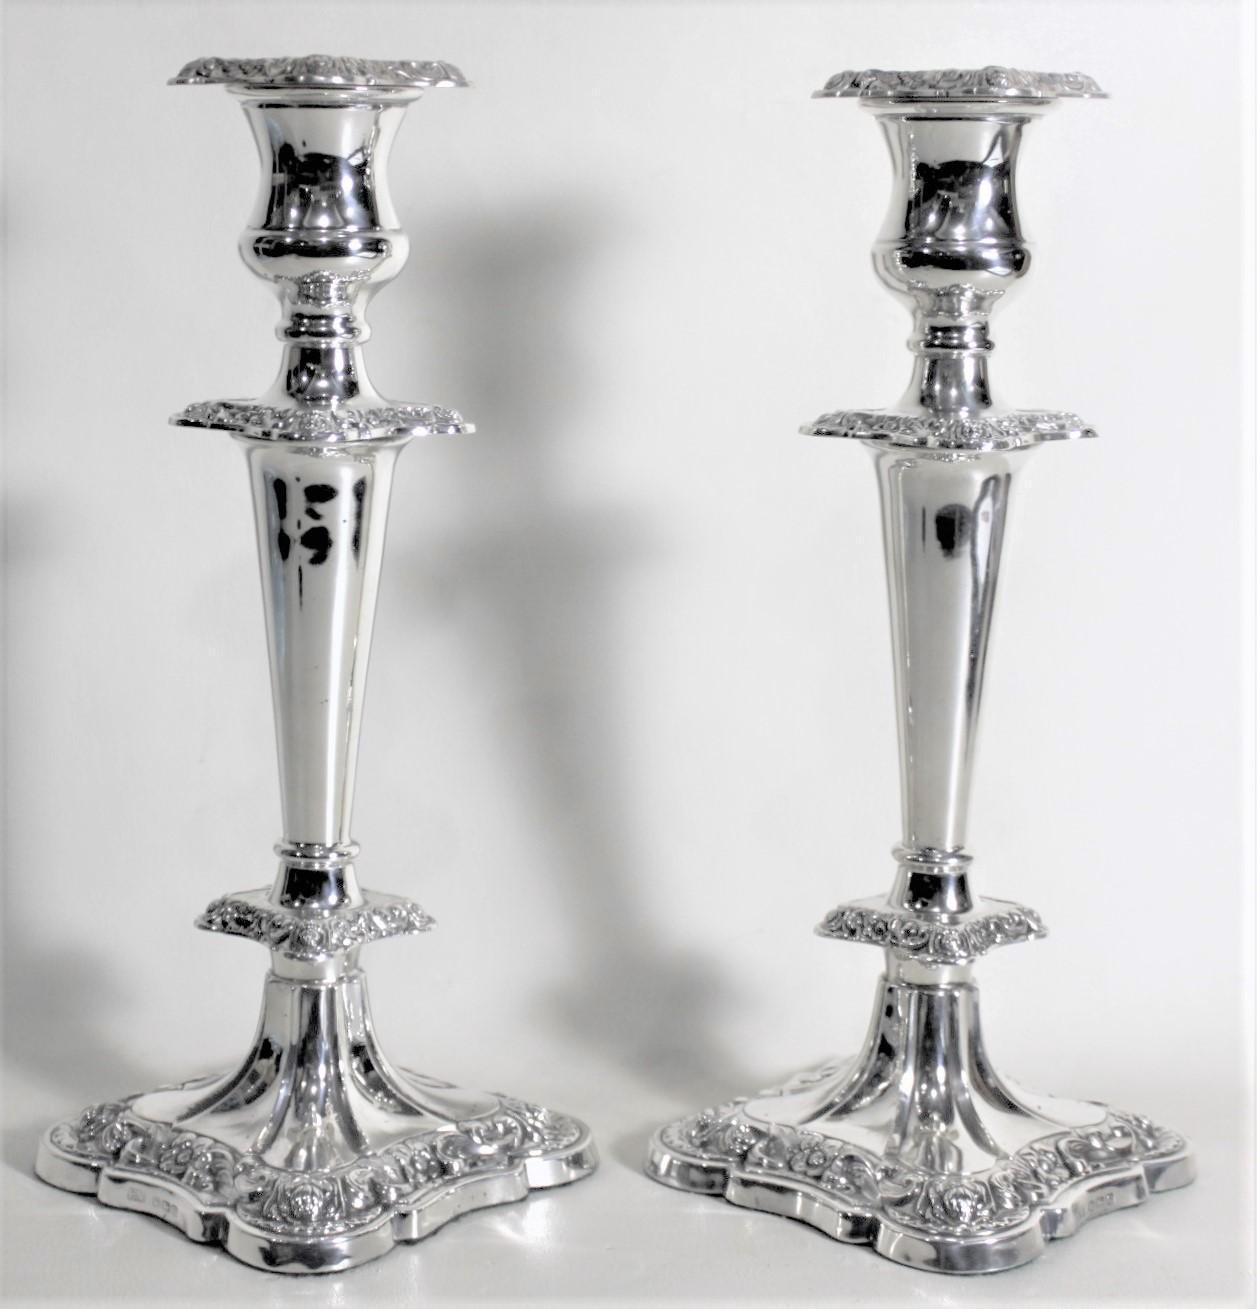 Pair of English Sterling Silver Candlesticks with Chased Floral Decoration 2